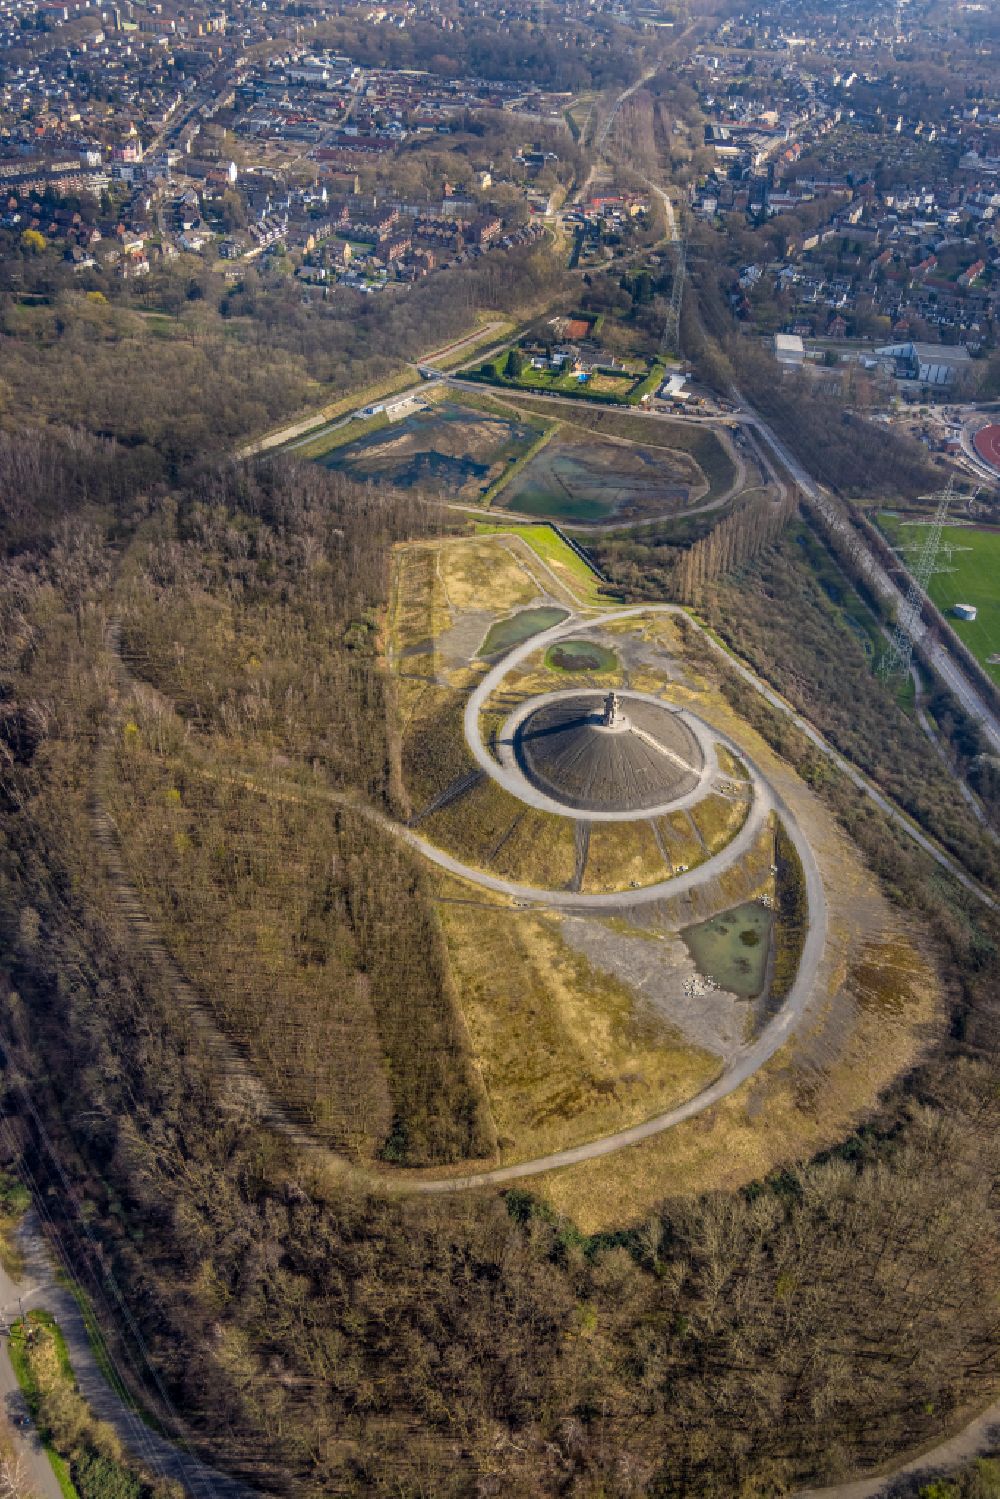 Aerial image Gelsenkirchen - reclamation site of the former mining dump Rheinelbe and todays recreation area in the district Ueckendorf in Gelsenkirchen at Ruhrgebiet in the state North Rhine-Westphalia, Germany